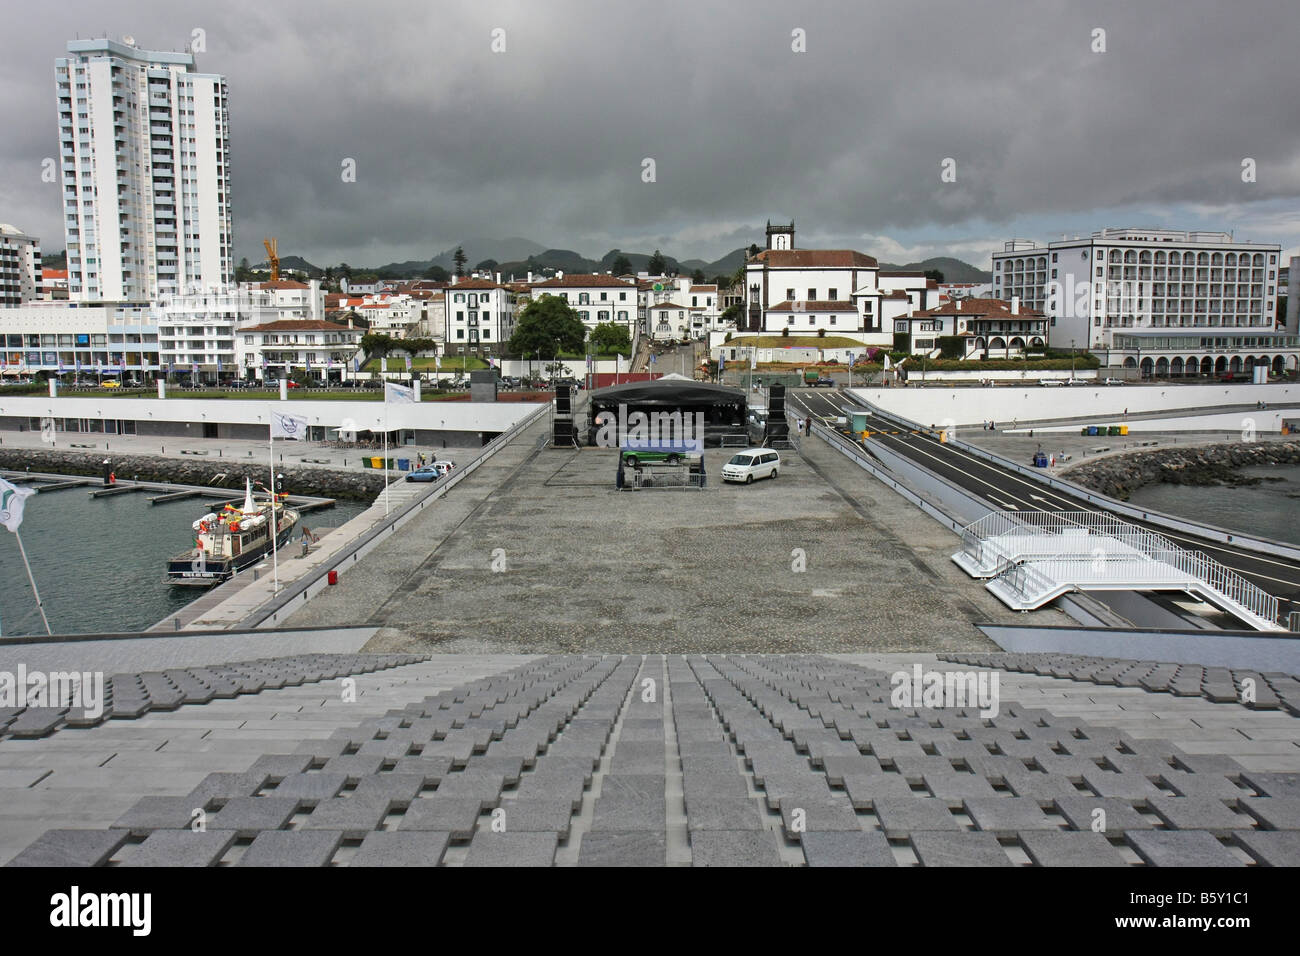 View of Ponta Delgada from the seats at the outdoor concert arena by the marina, São Miguel, Azores, Portugal Stock Photo